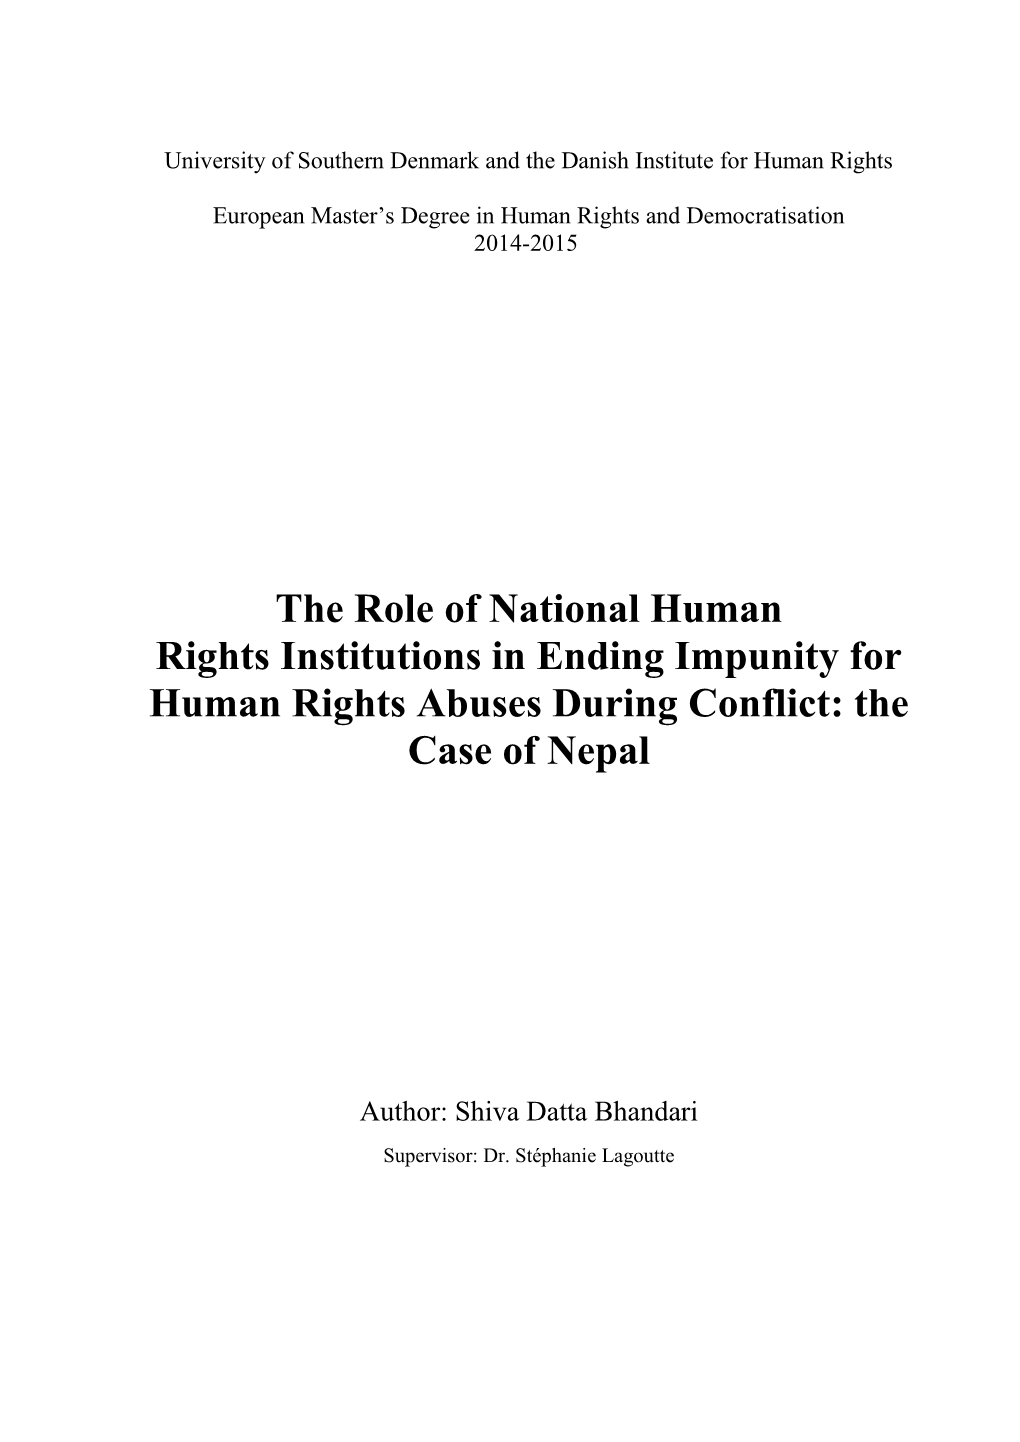 The Role of National Human Rights Institutions in Ending Impunity for Human Rights Abuses During Conflict: the Case of Nepal